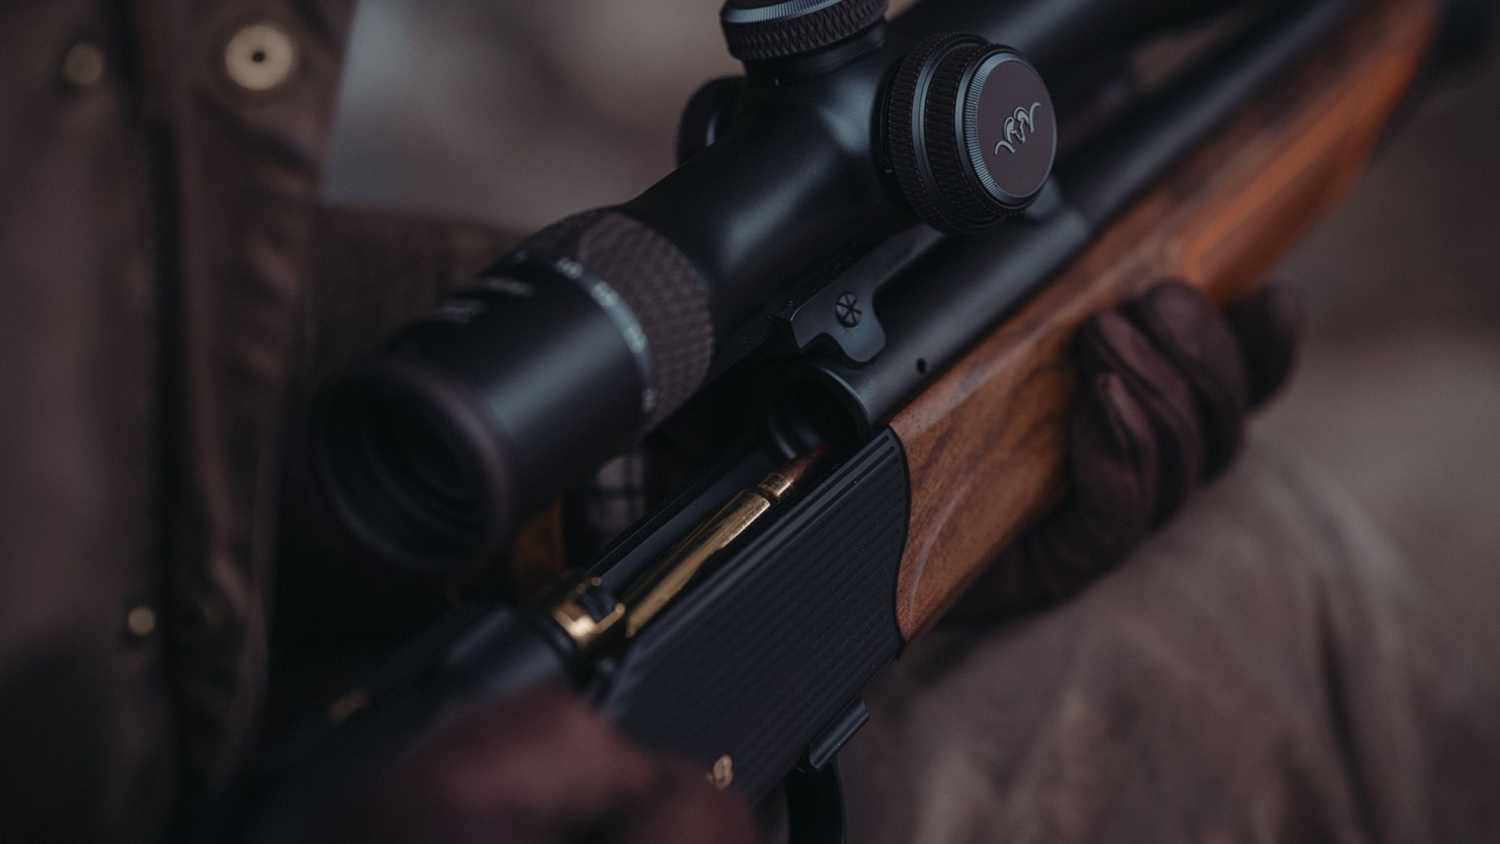 Ball & Buck and Blaser Team Up to Create the New Signature R8 Rifle